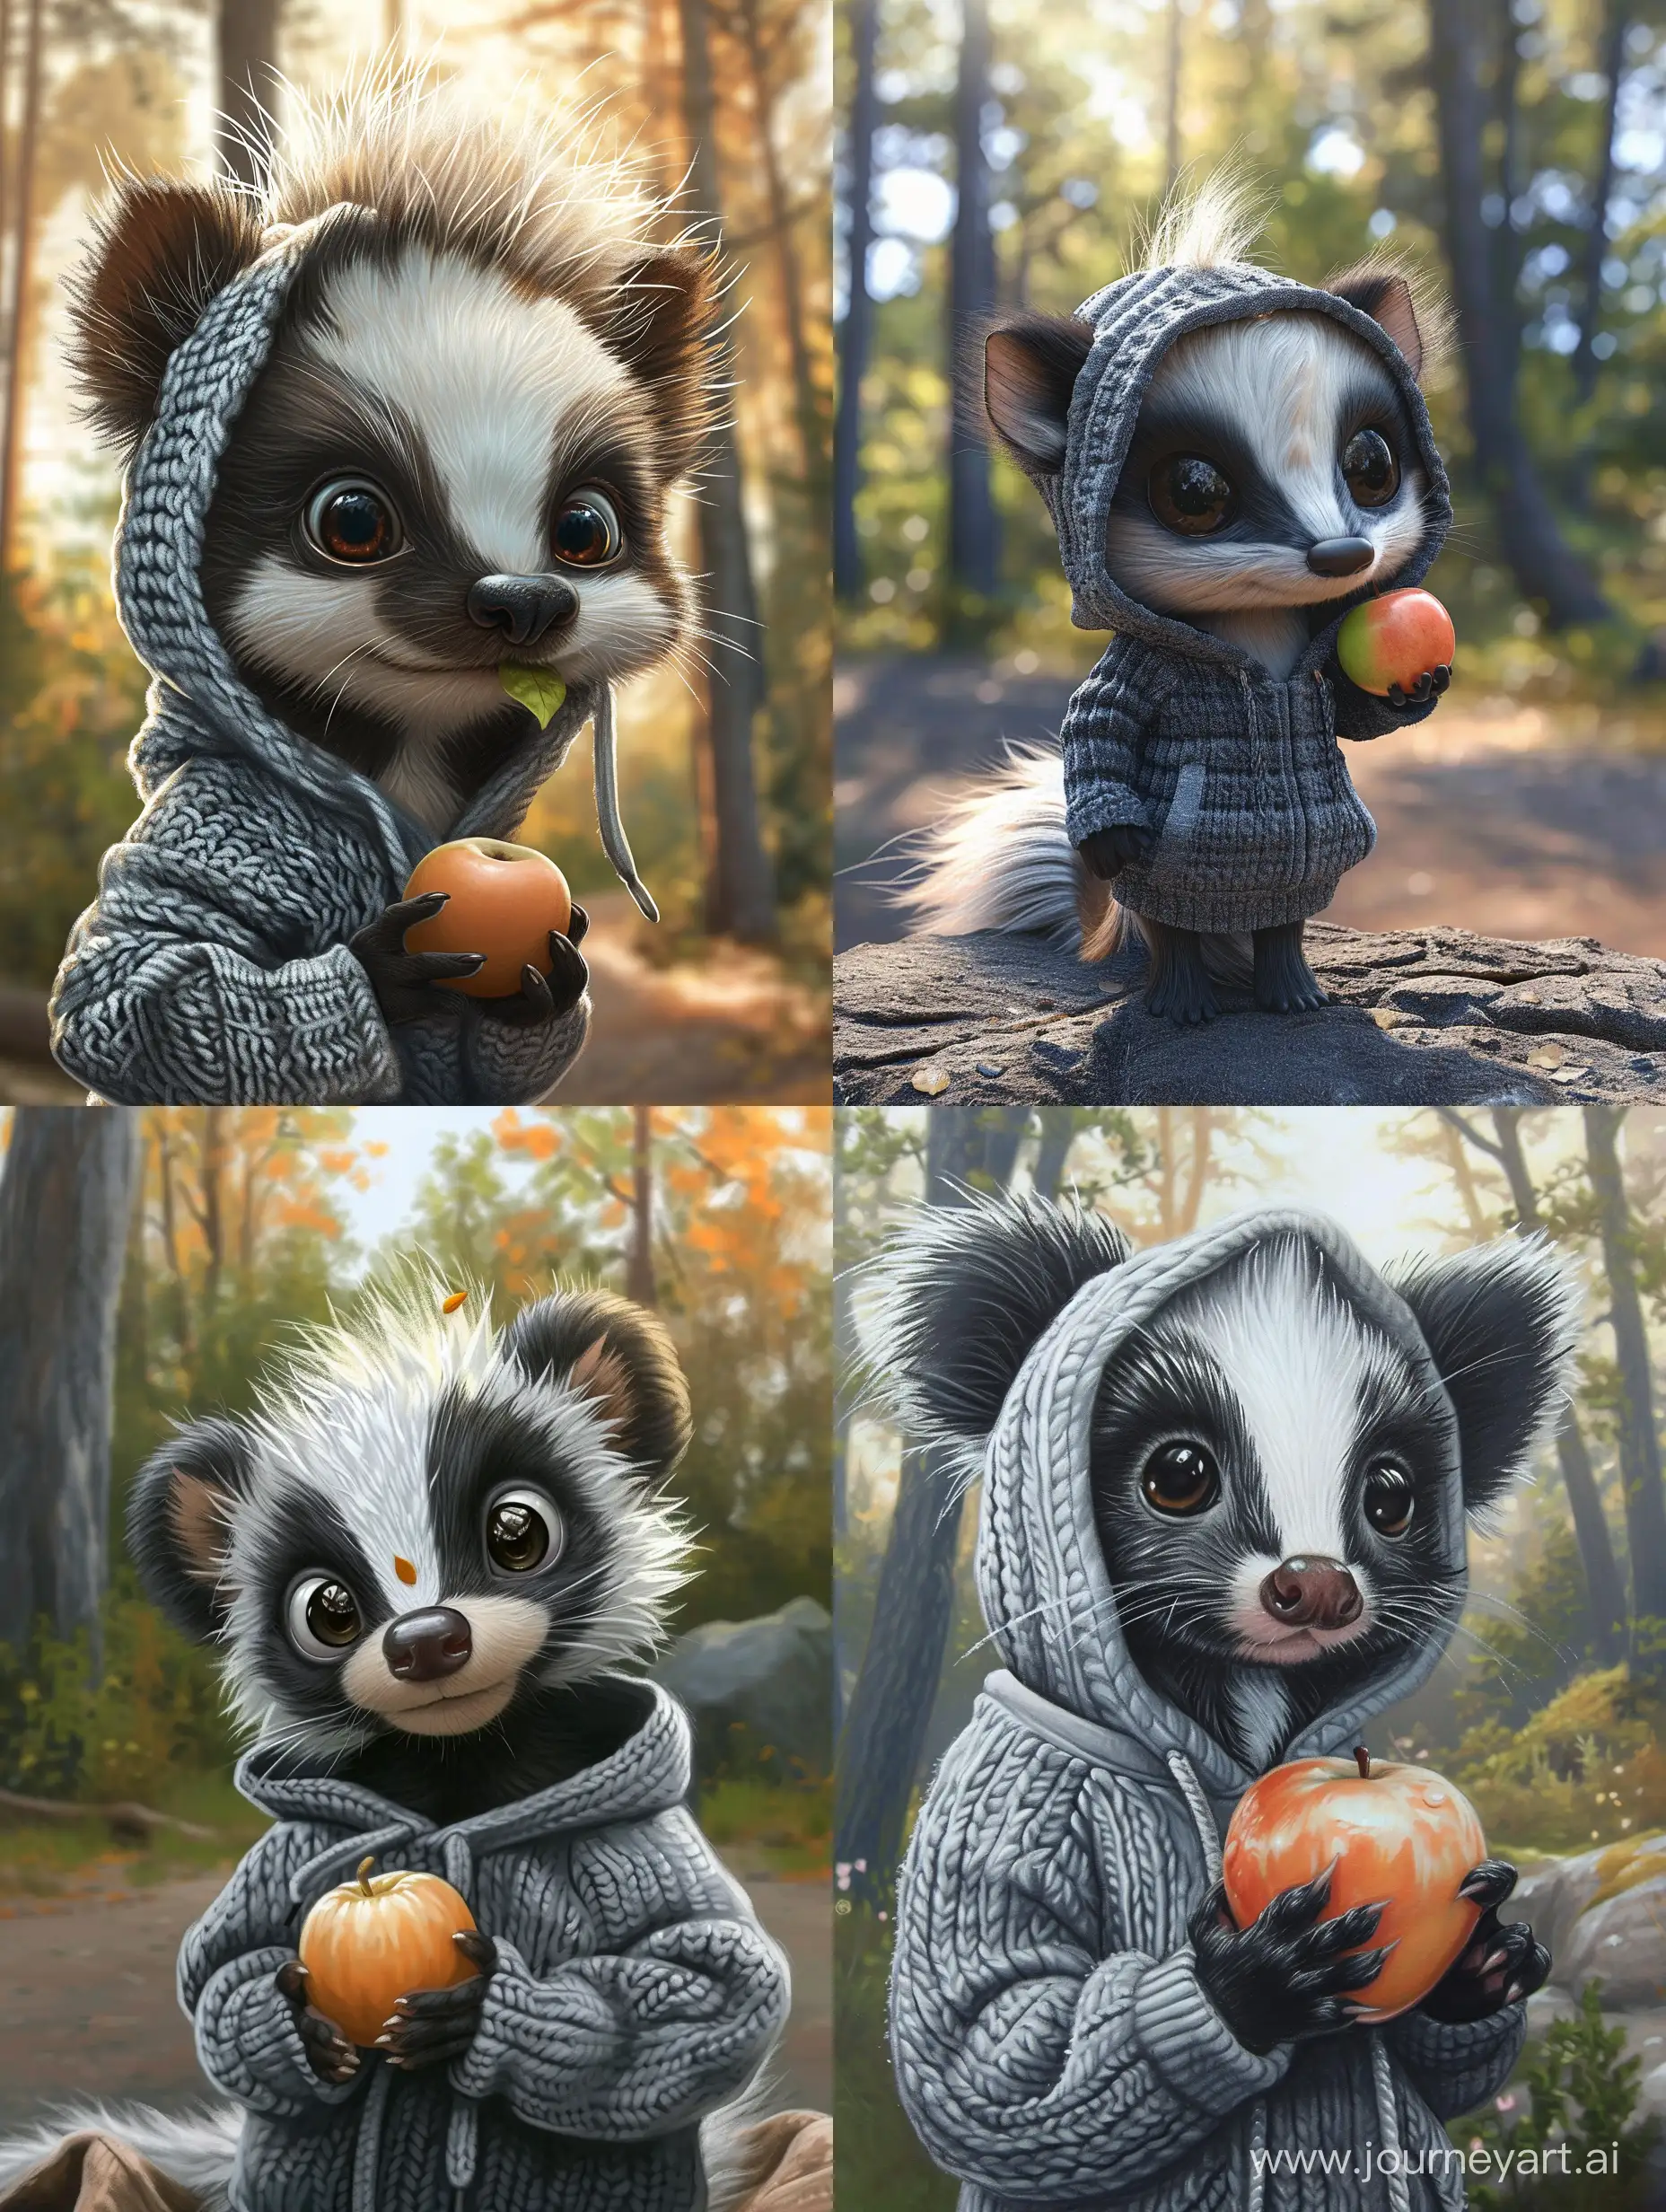 Adorable-Skunk-with-Apple-in-Enchanting-Forest-Scene